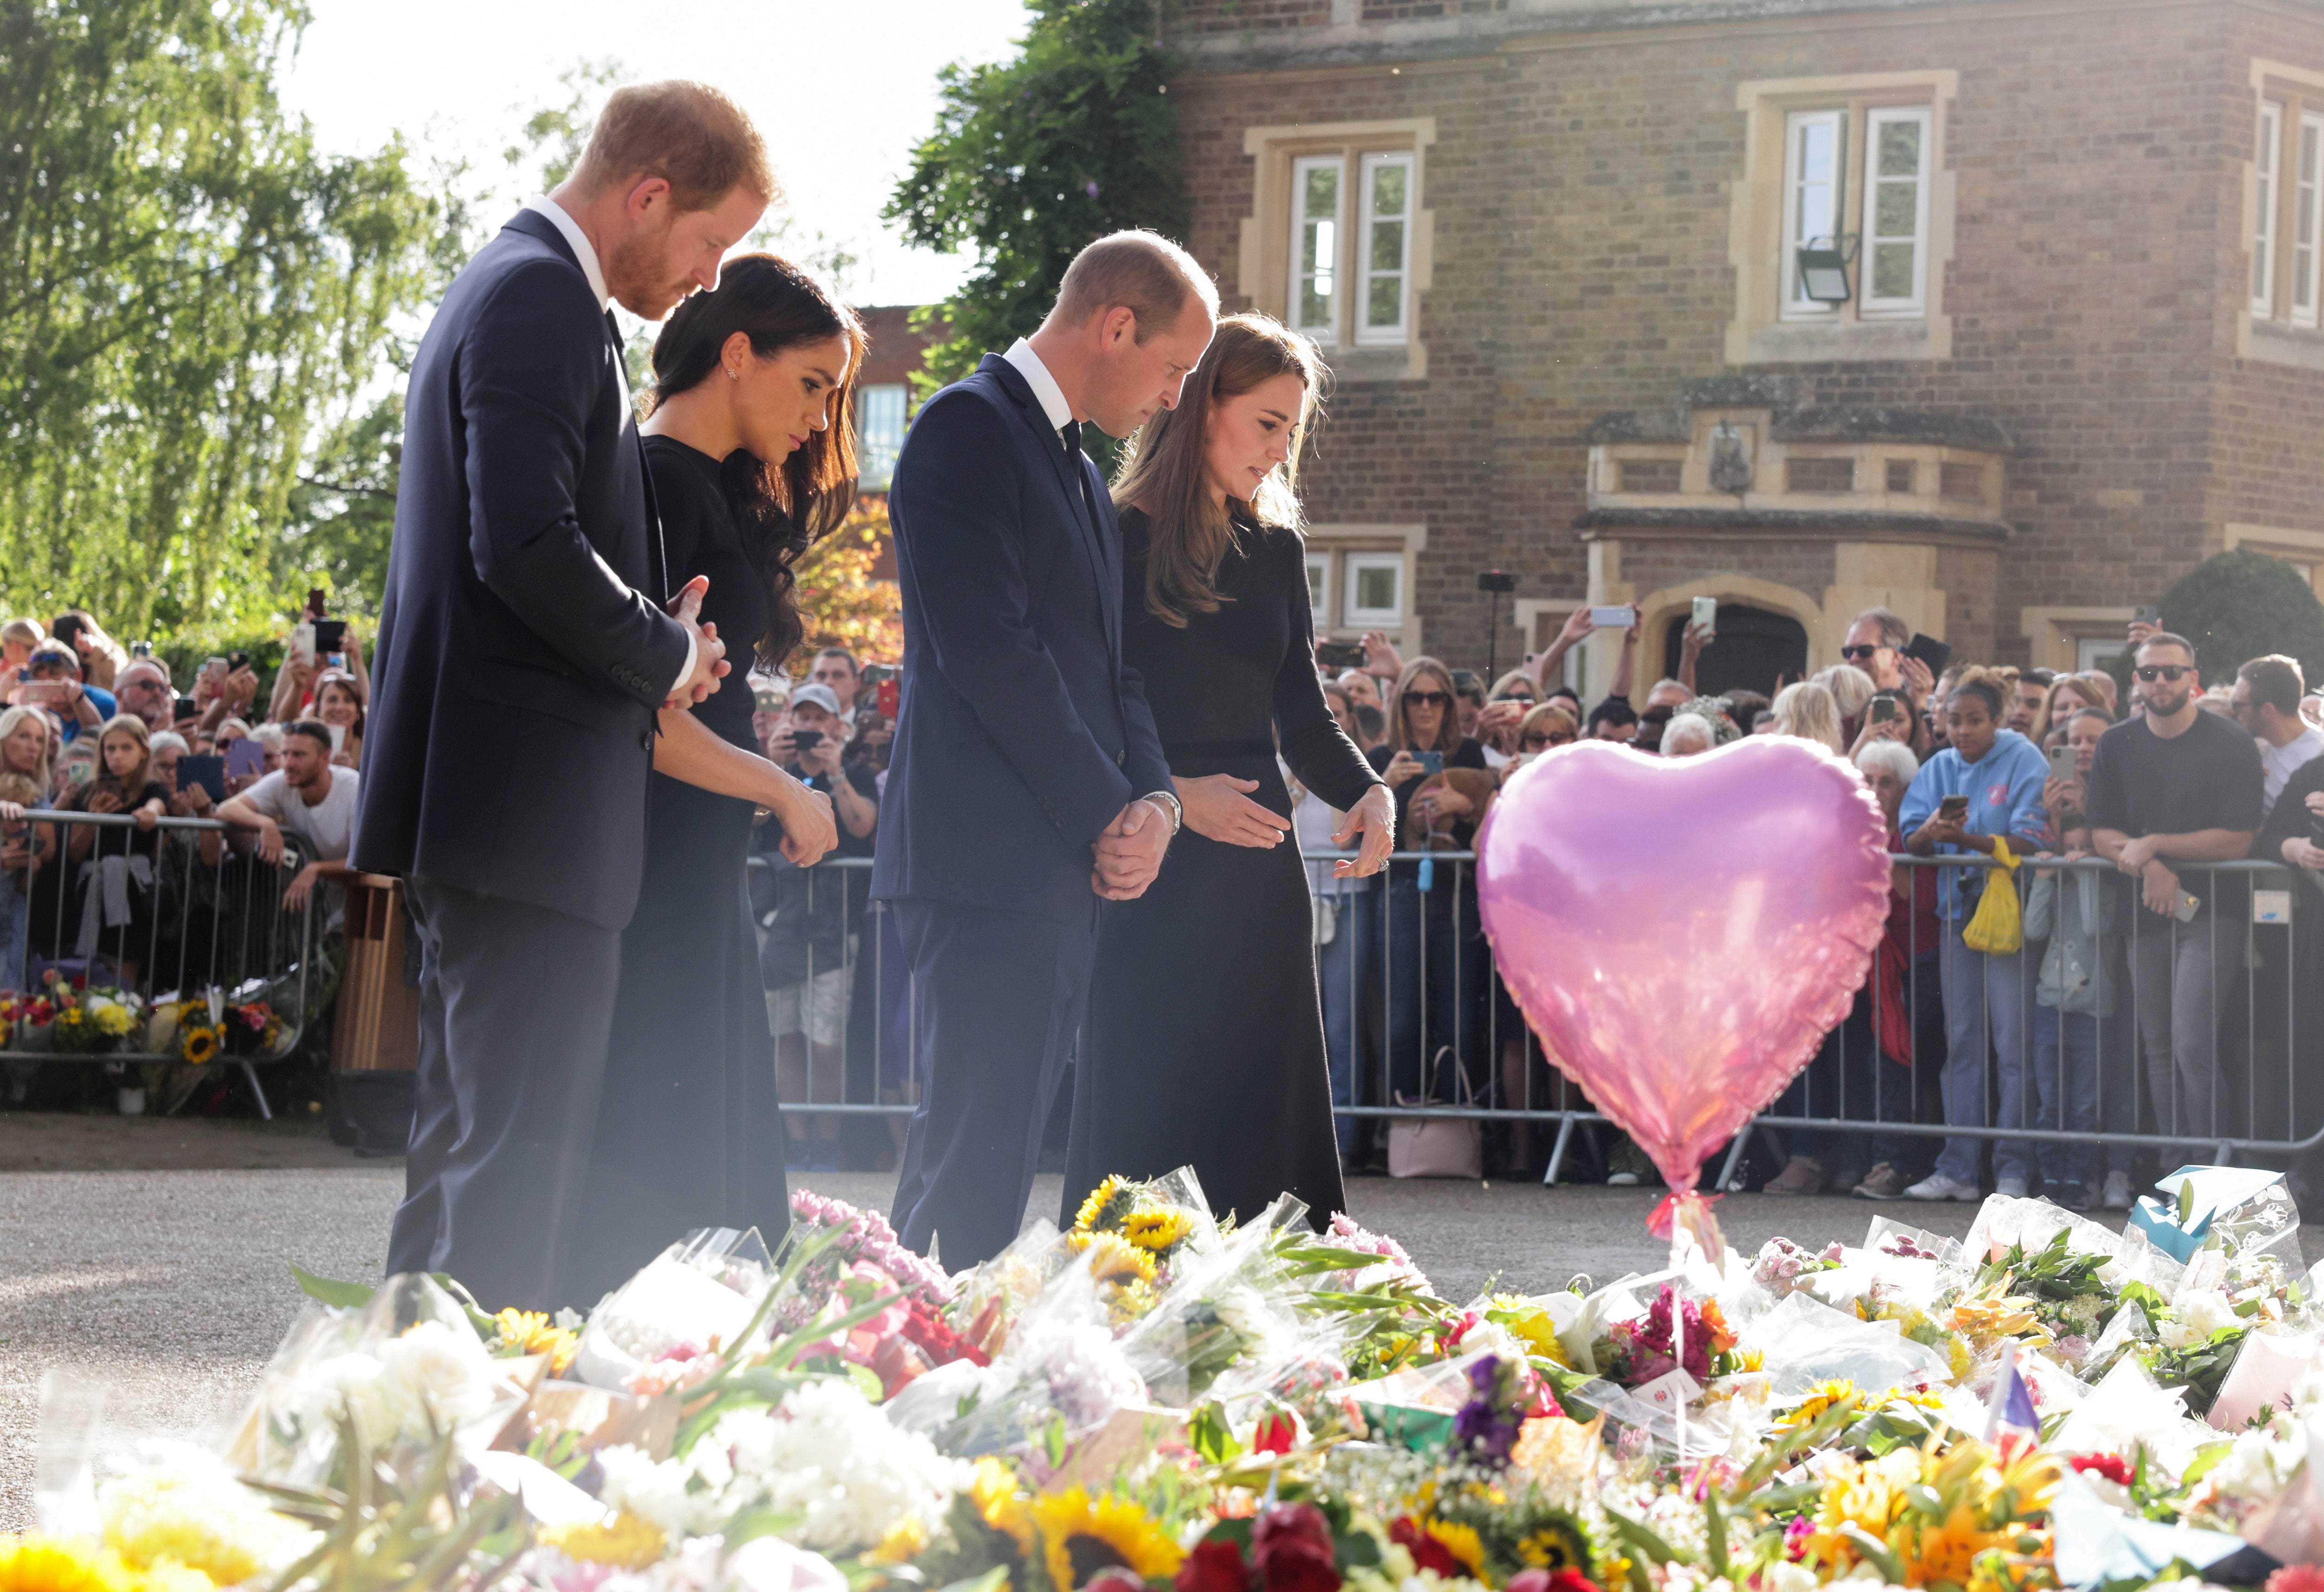 Harry, Meghan, William and Kate view the floral tributes at Windsor Castle (Chris Jackson/PA)